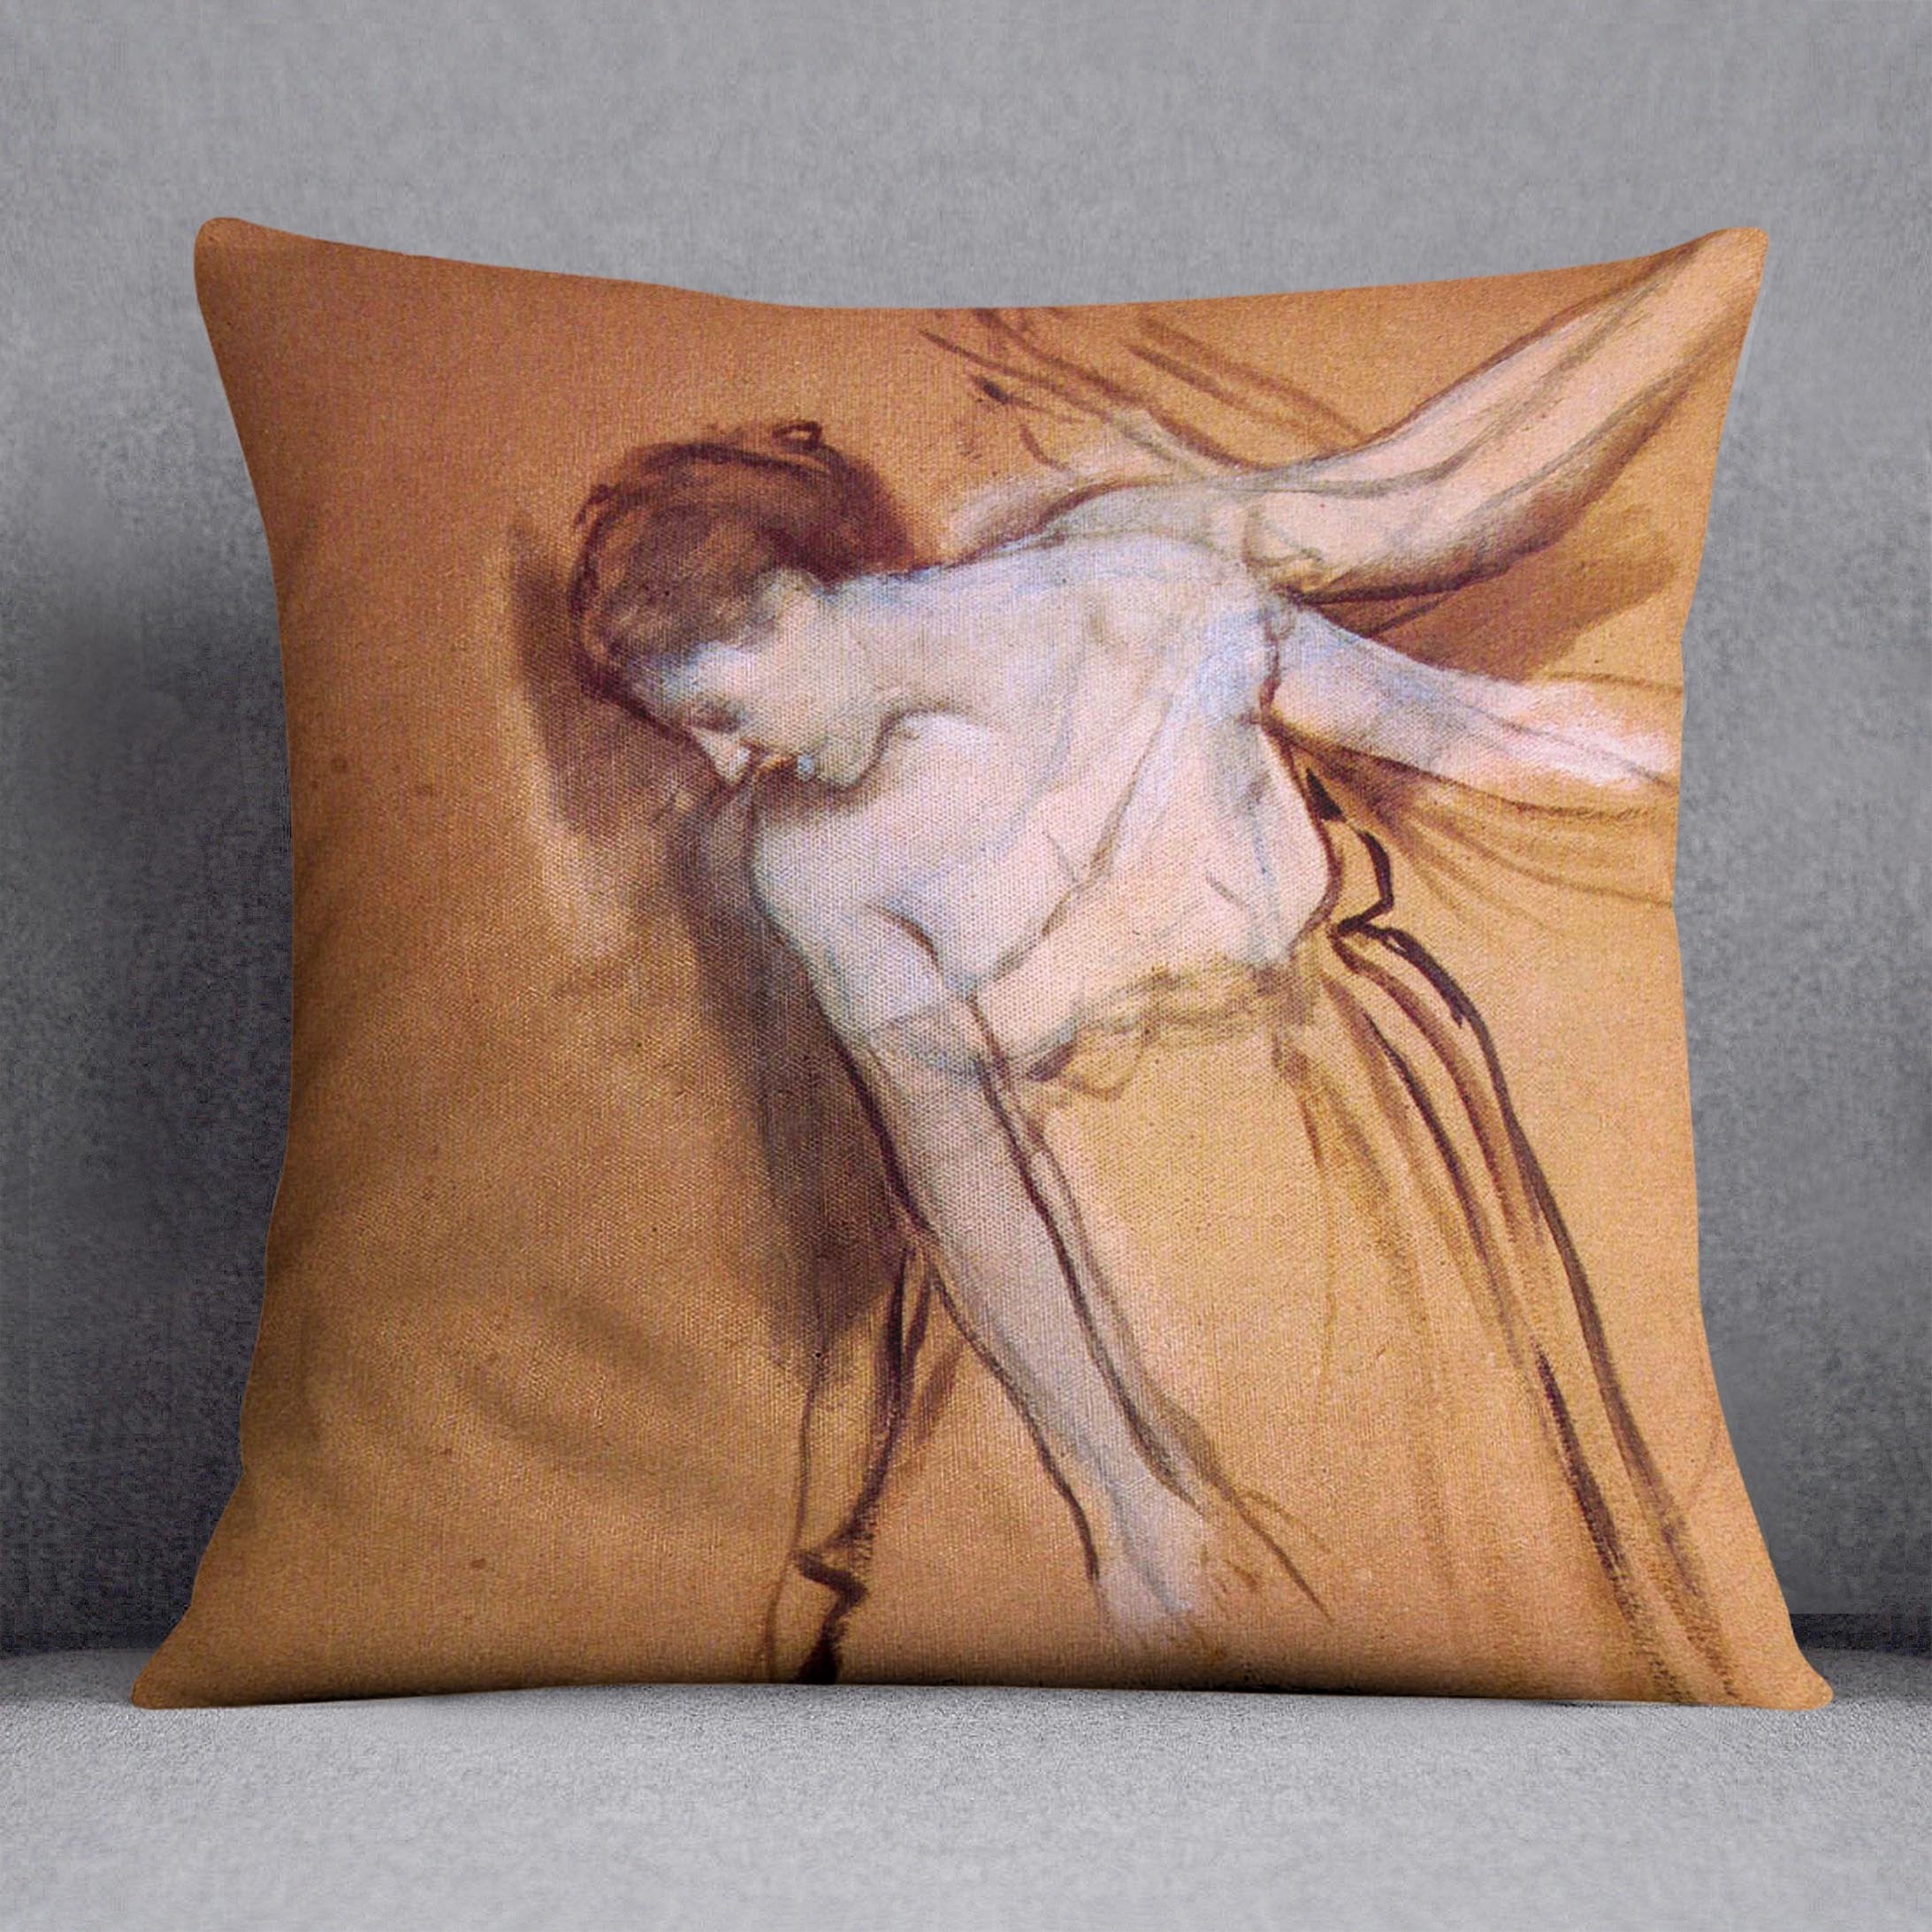 Standing with arms stretched bent to the side by Degas Cushion